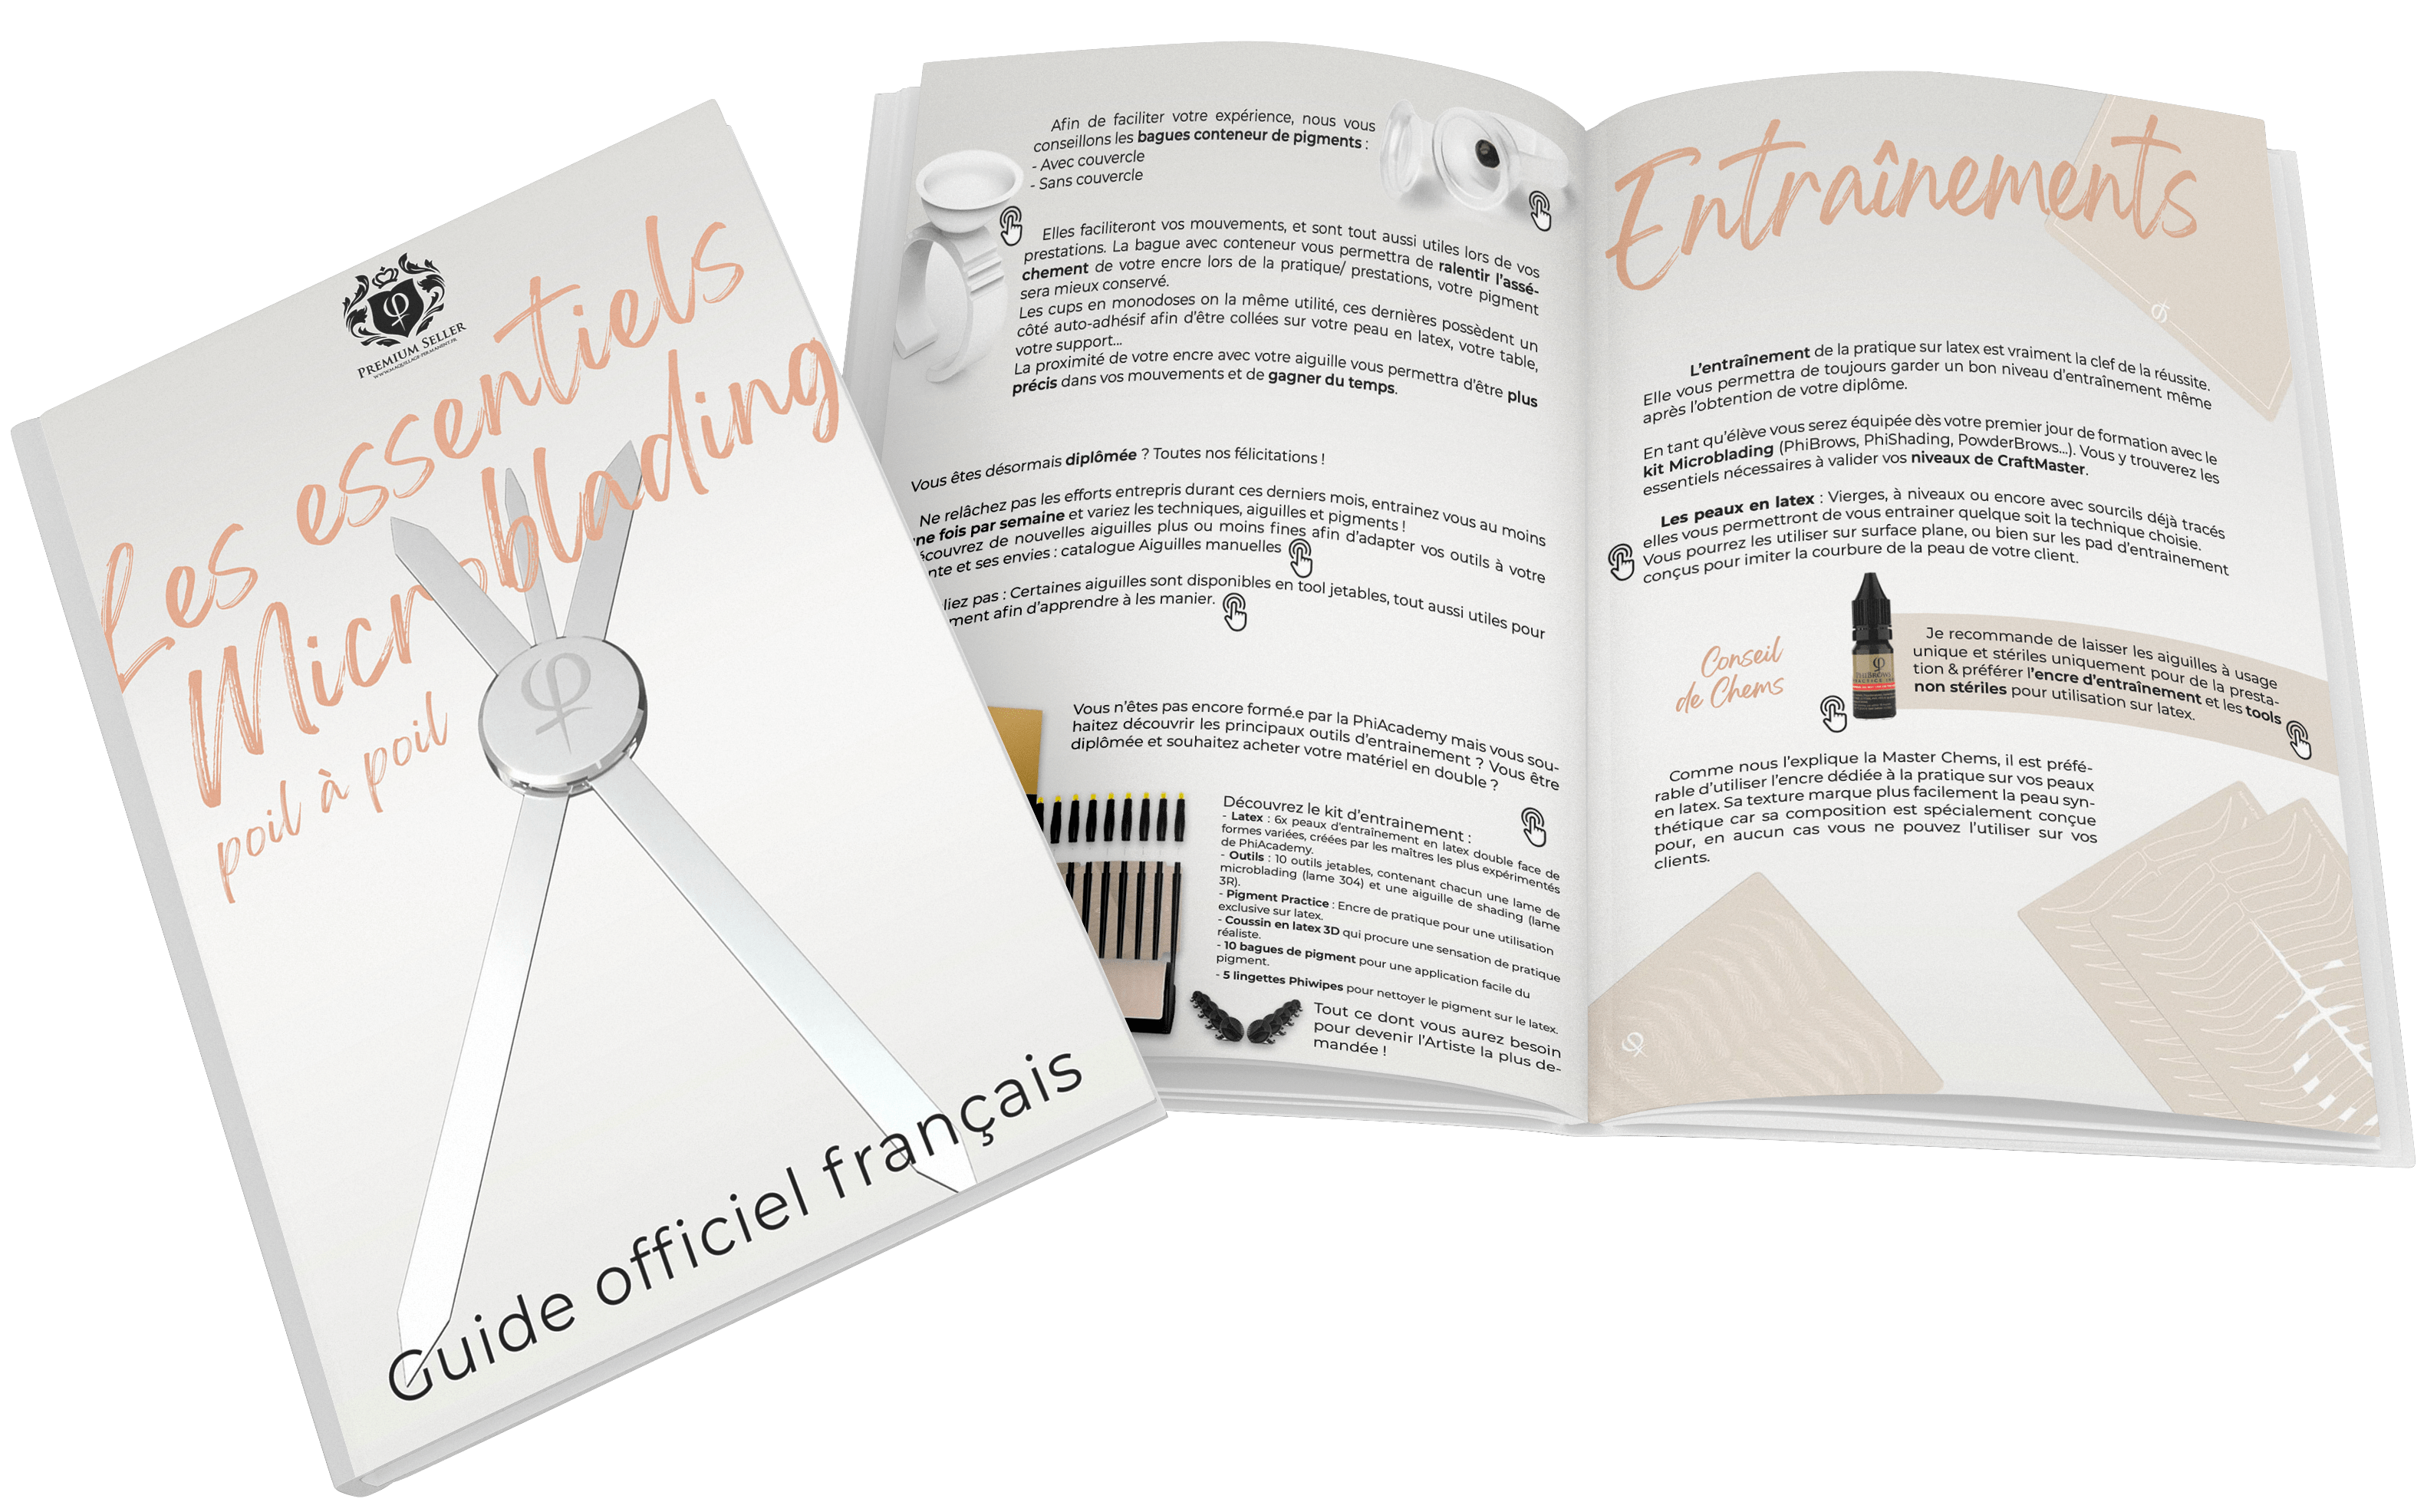 Catalogue aiguille manuelle microblading phibrows phishading